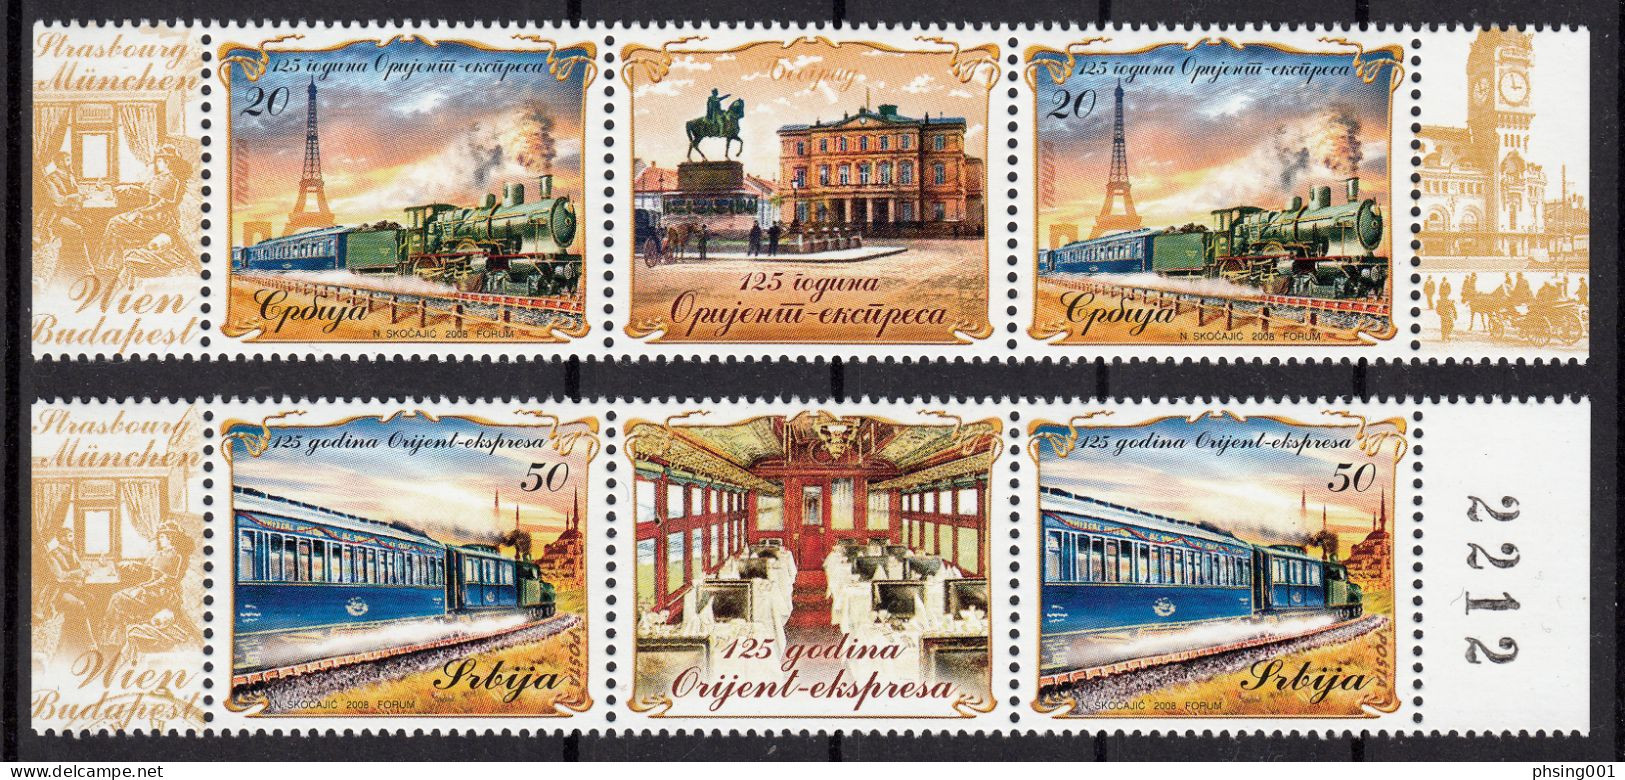 Serbia 2008 125 Anniversary Of The Orient Express Trains Locomotive Railways Eiffel Tower Paris France, Middle Row MNH - Trains